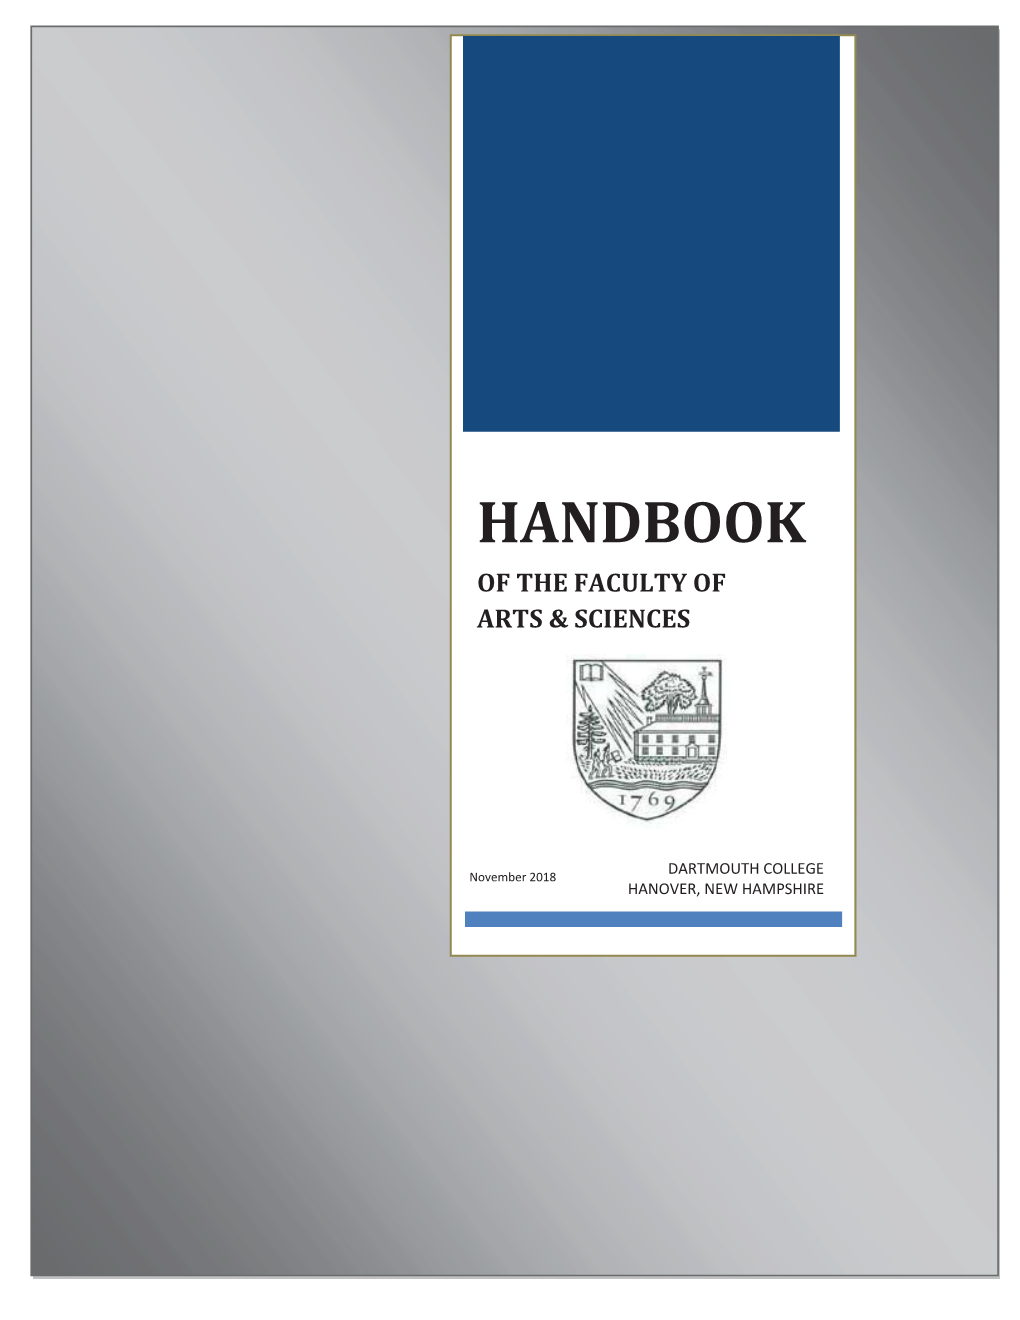 Handbook Replaces All Previous Editions and Is the Document of Record When Referencing the Operating Principles of the Arts & Sciences